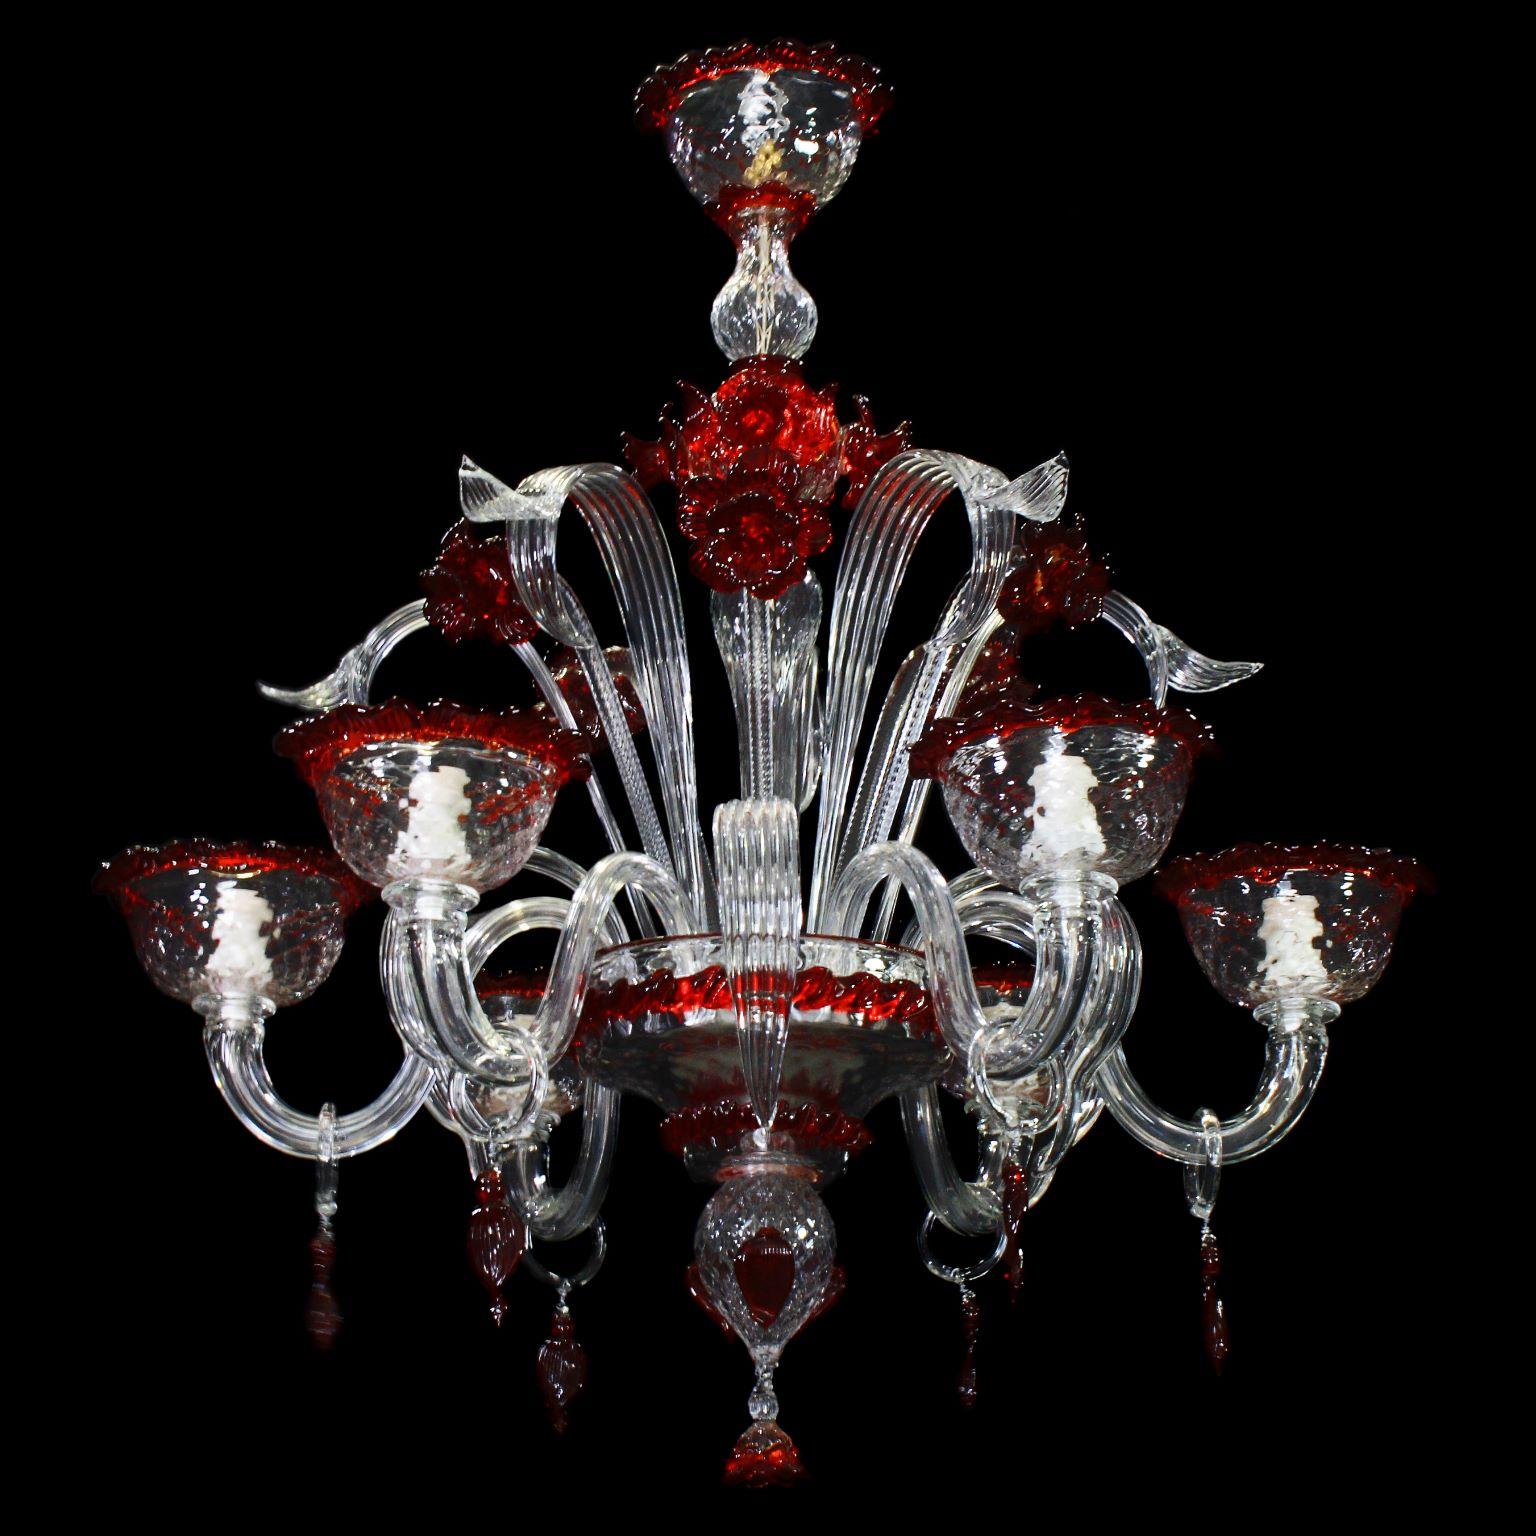 Italian Artistic Chandelier 6 Arms Clear Murano Glass Red Details by Multiforme For Sale